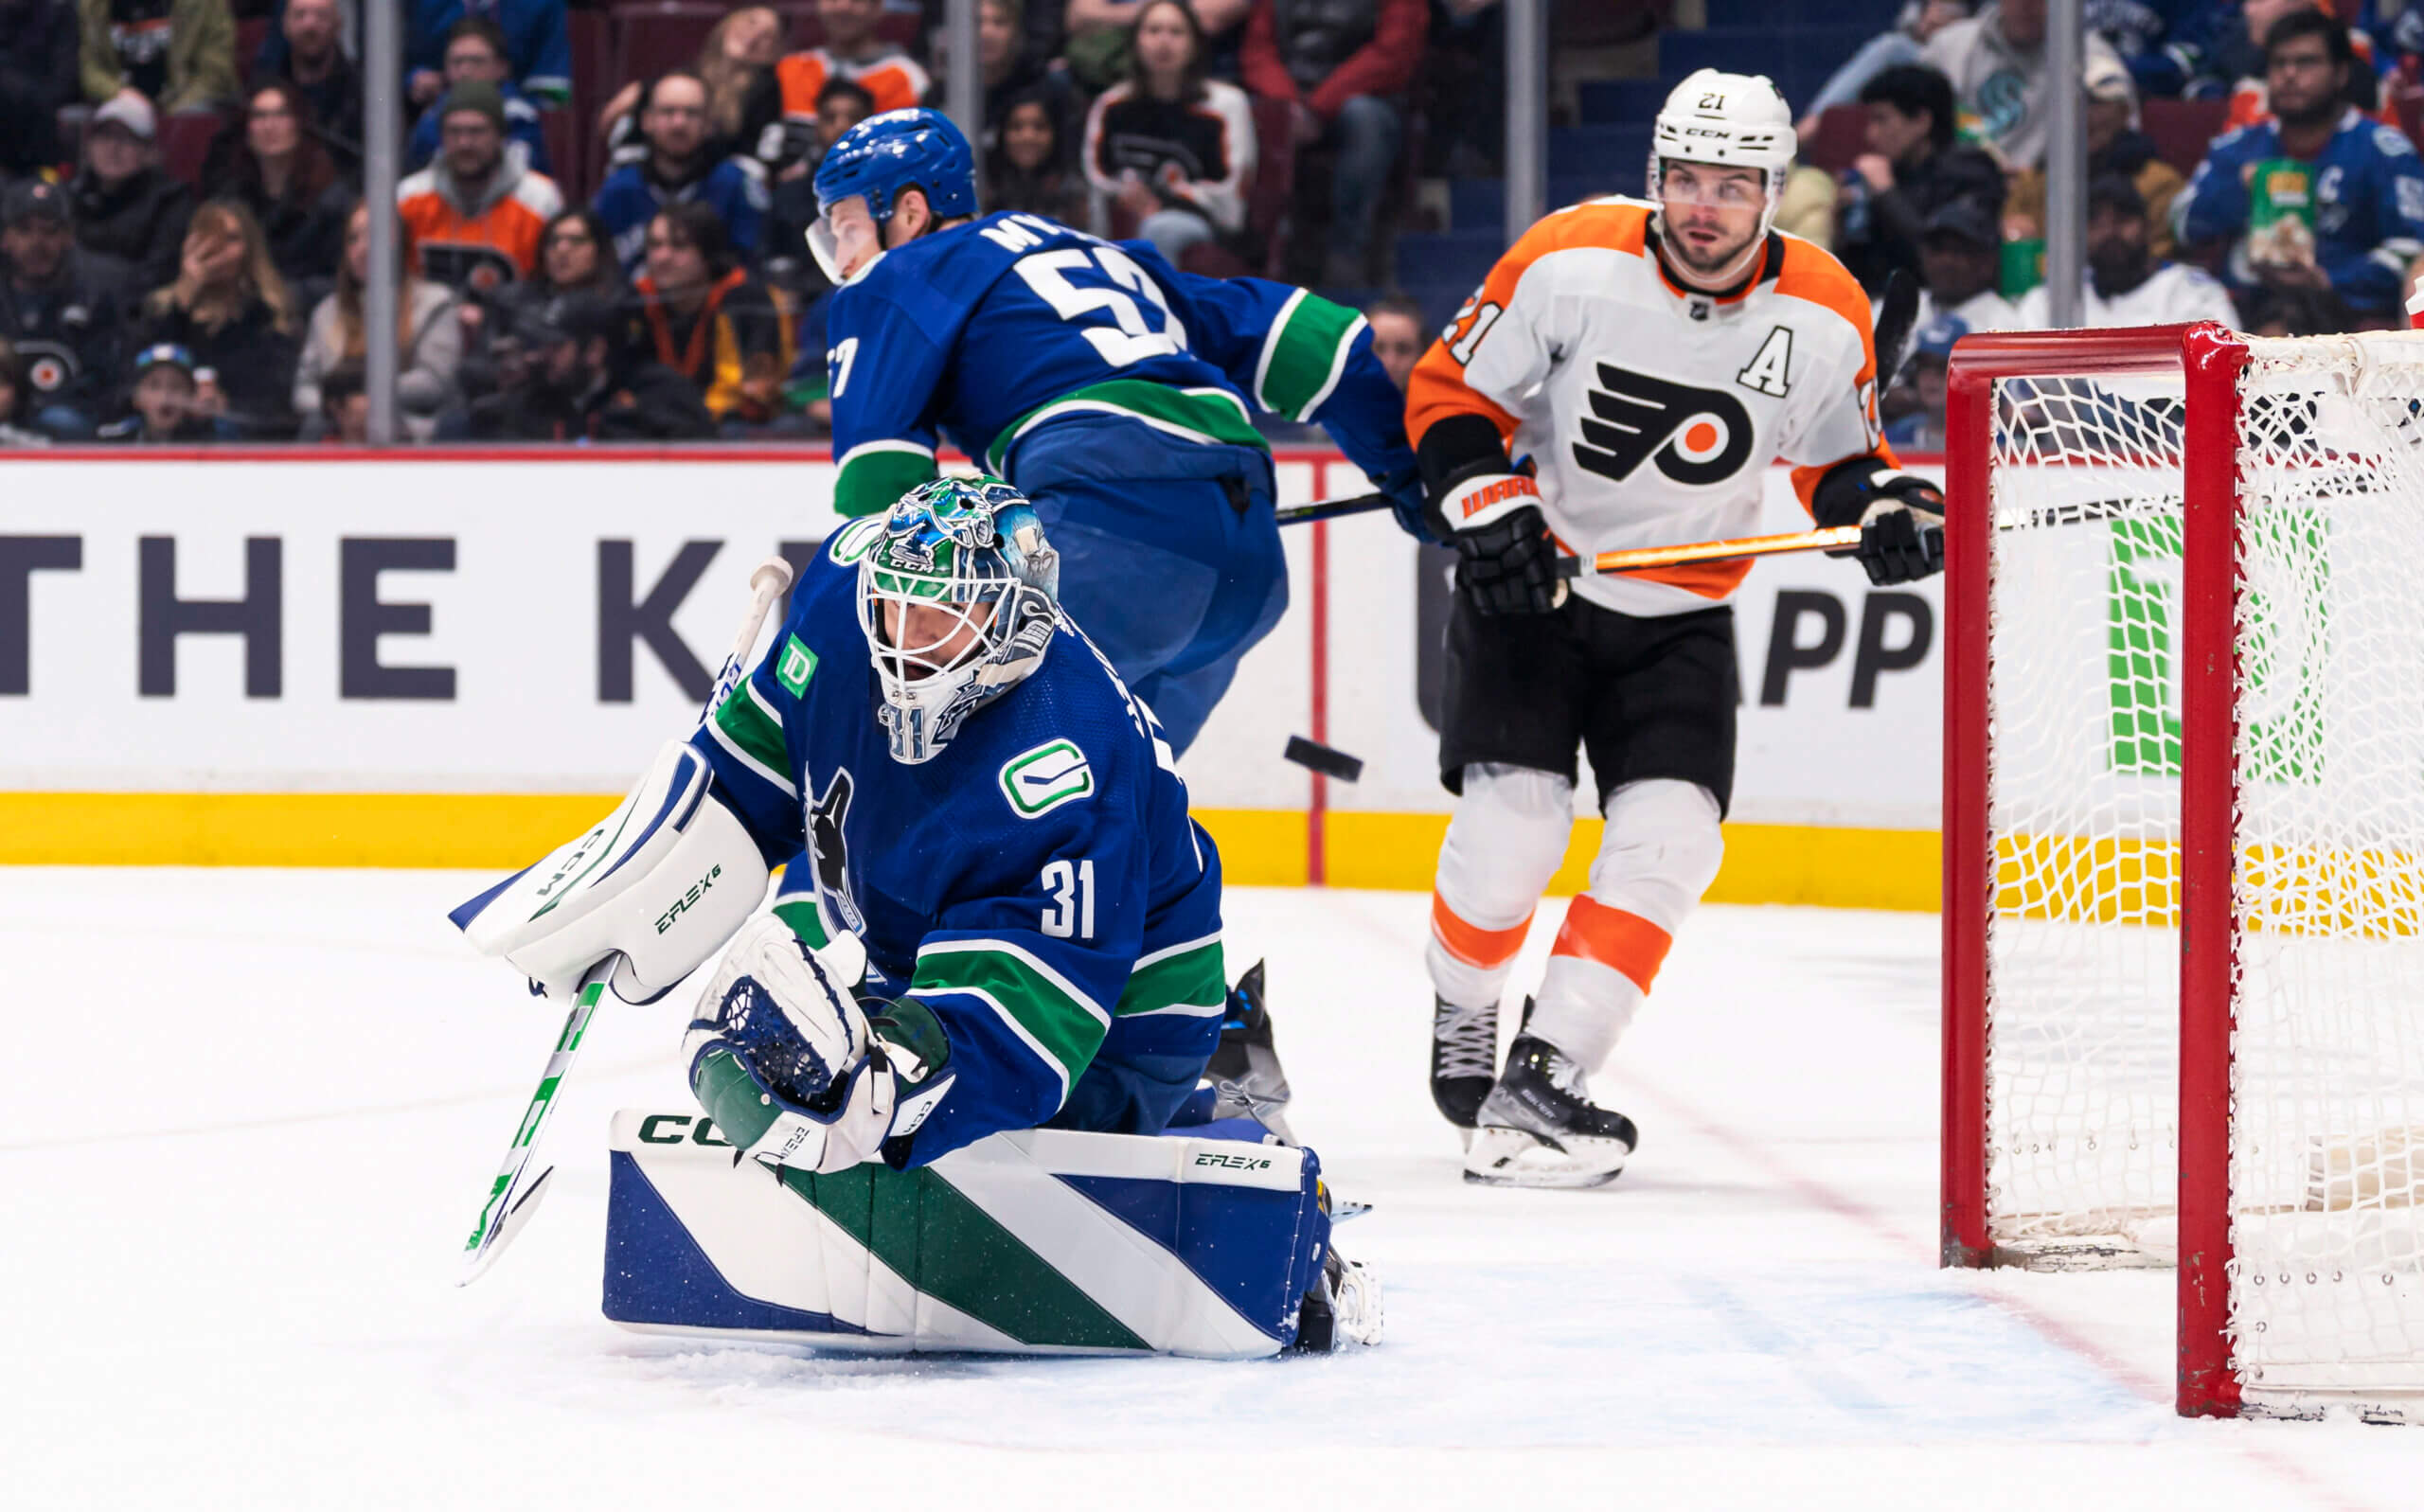 Canucks vs Flyers: What we learned from their 6-2 win